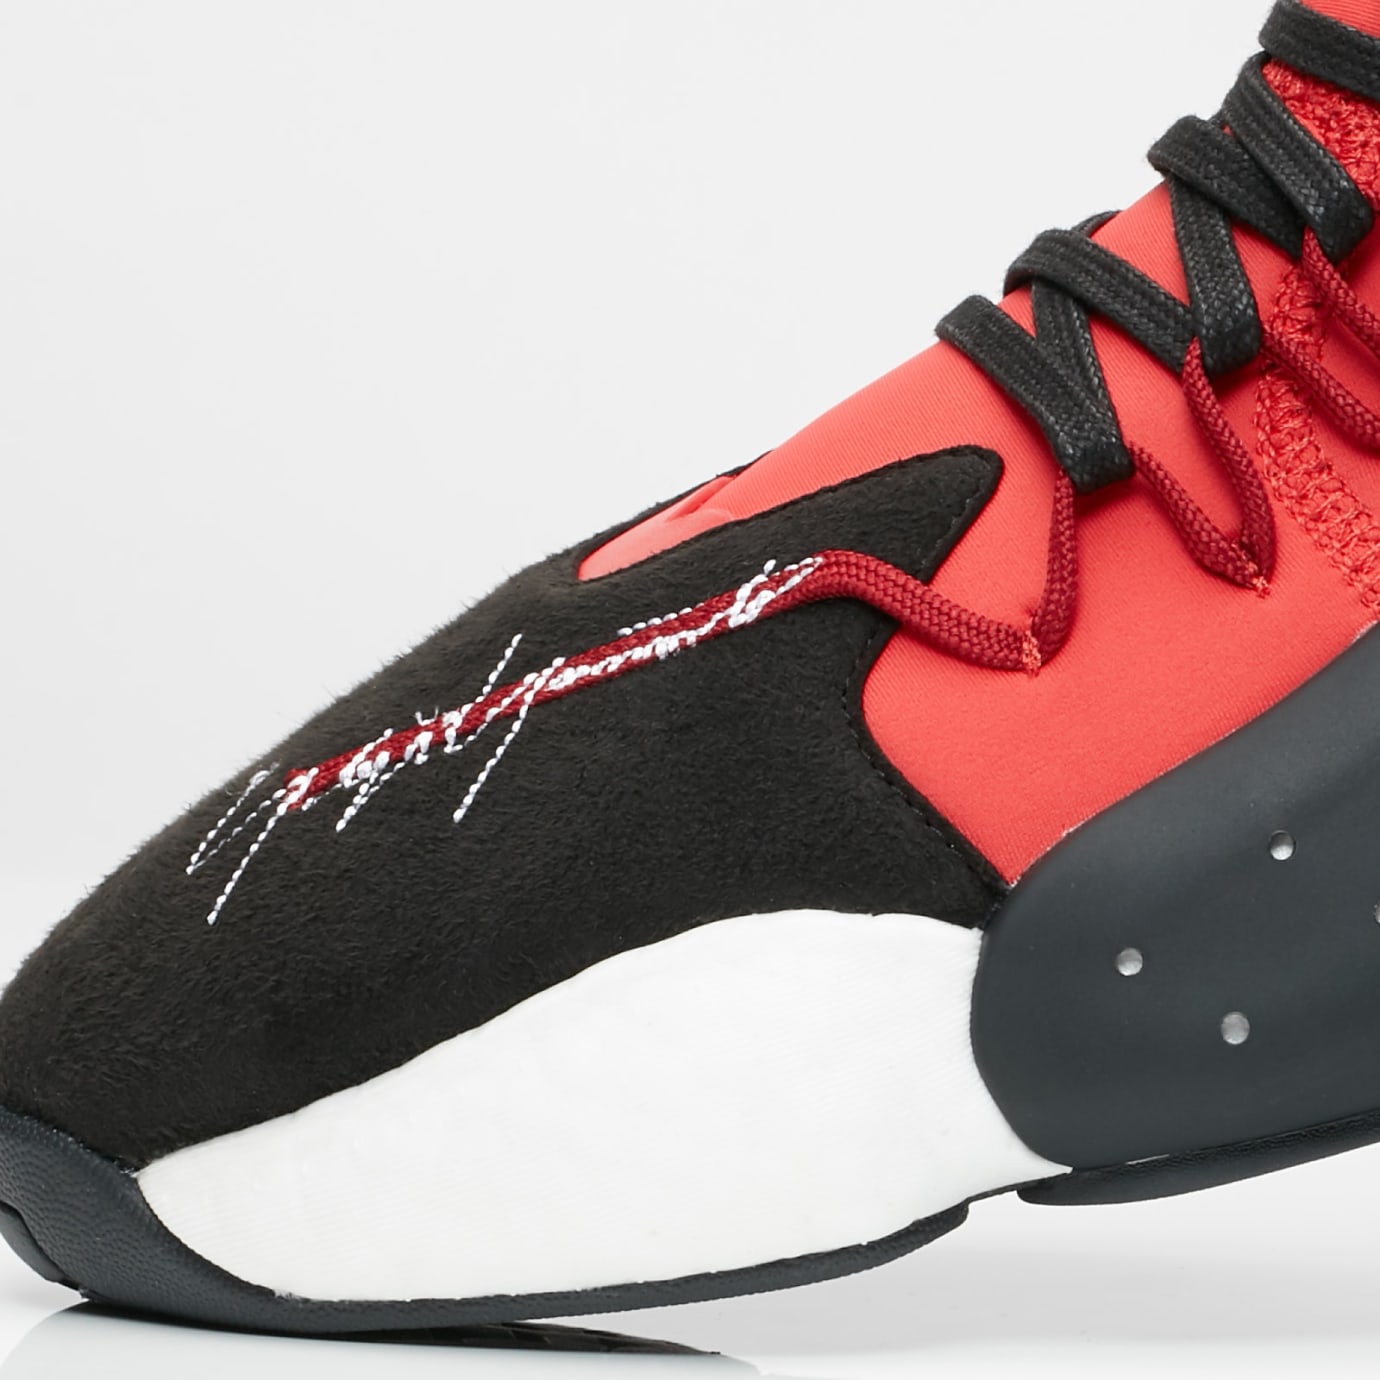 Adidas Y-3 BYW Bball BC0338 Core Black/Lush Red/Core White Release